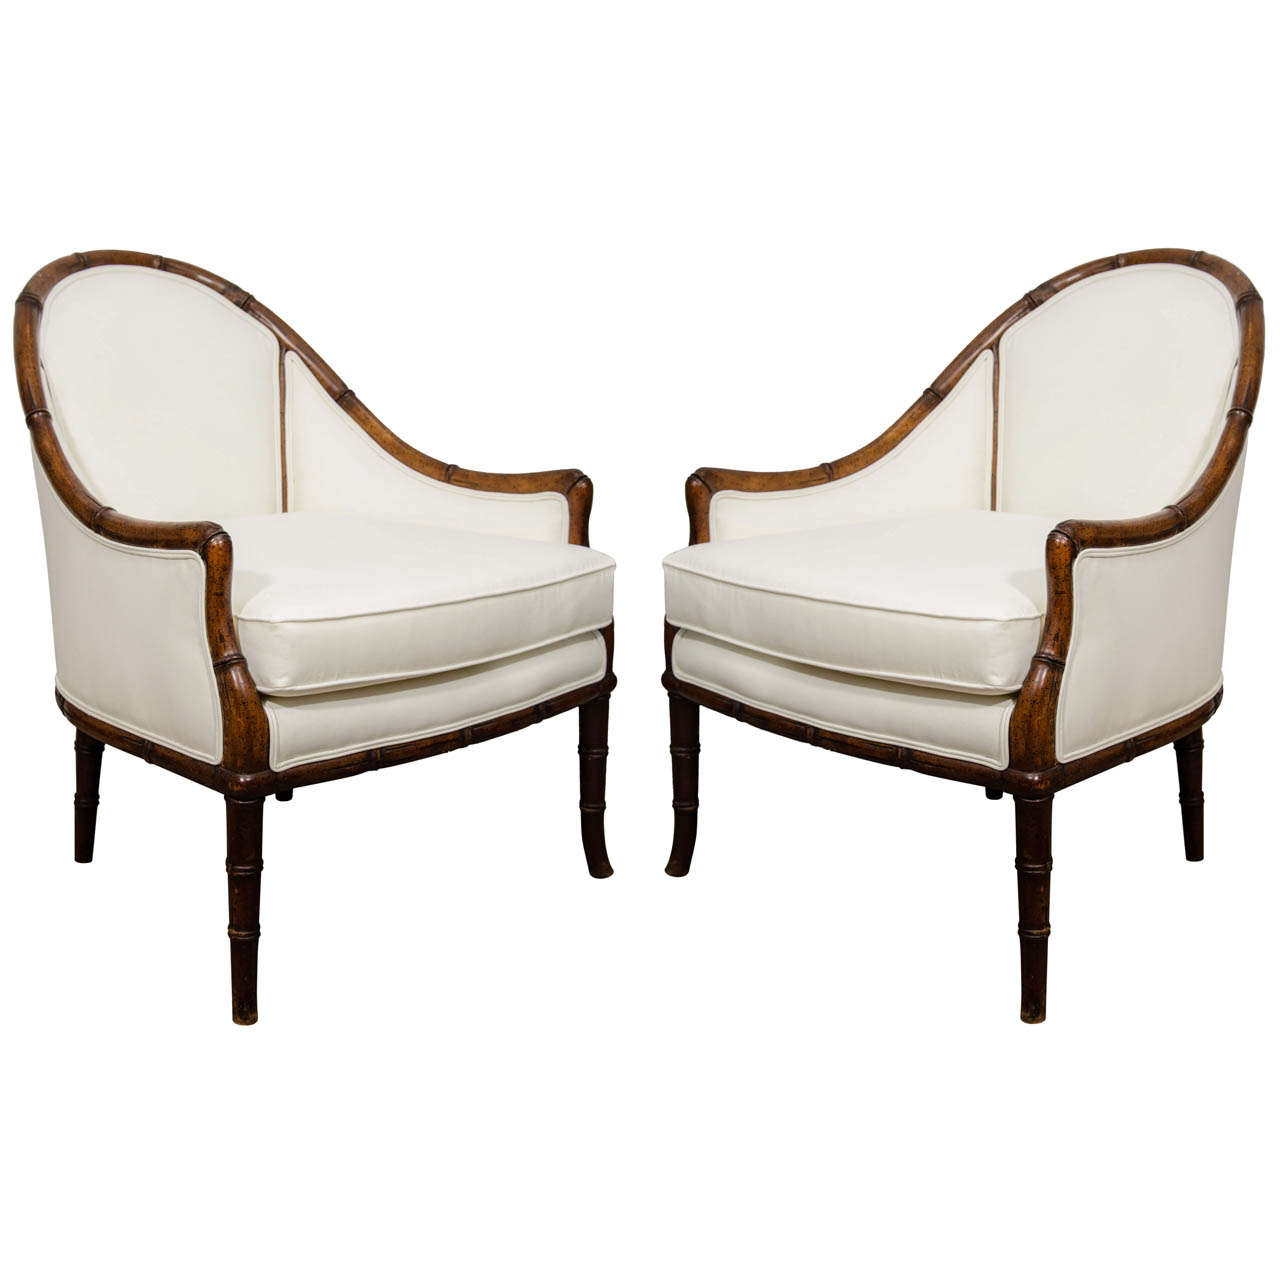 Pair of vintage faux bamboo arm chairs